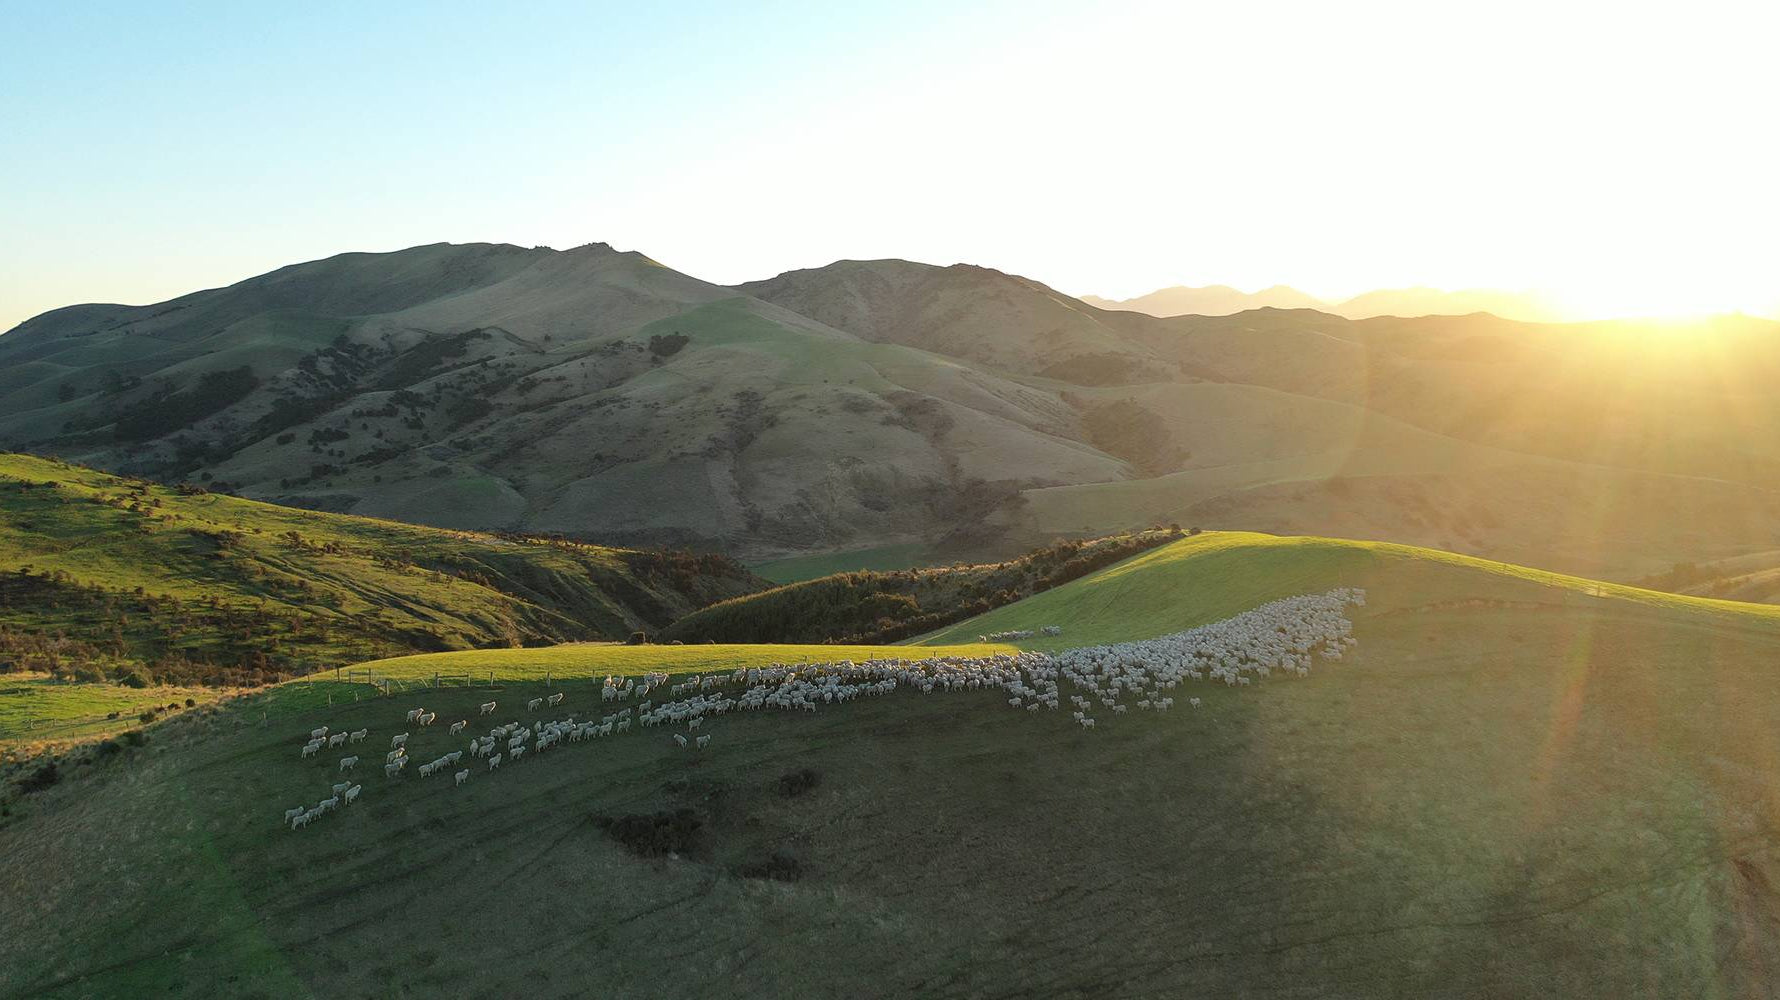 Glenthorne to Garment: The Journey of Our Merino Wool and the Role of Regenerative Farming